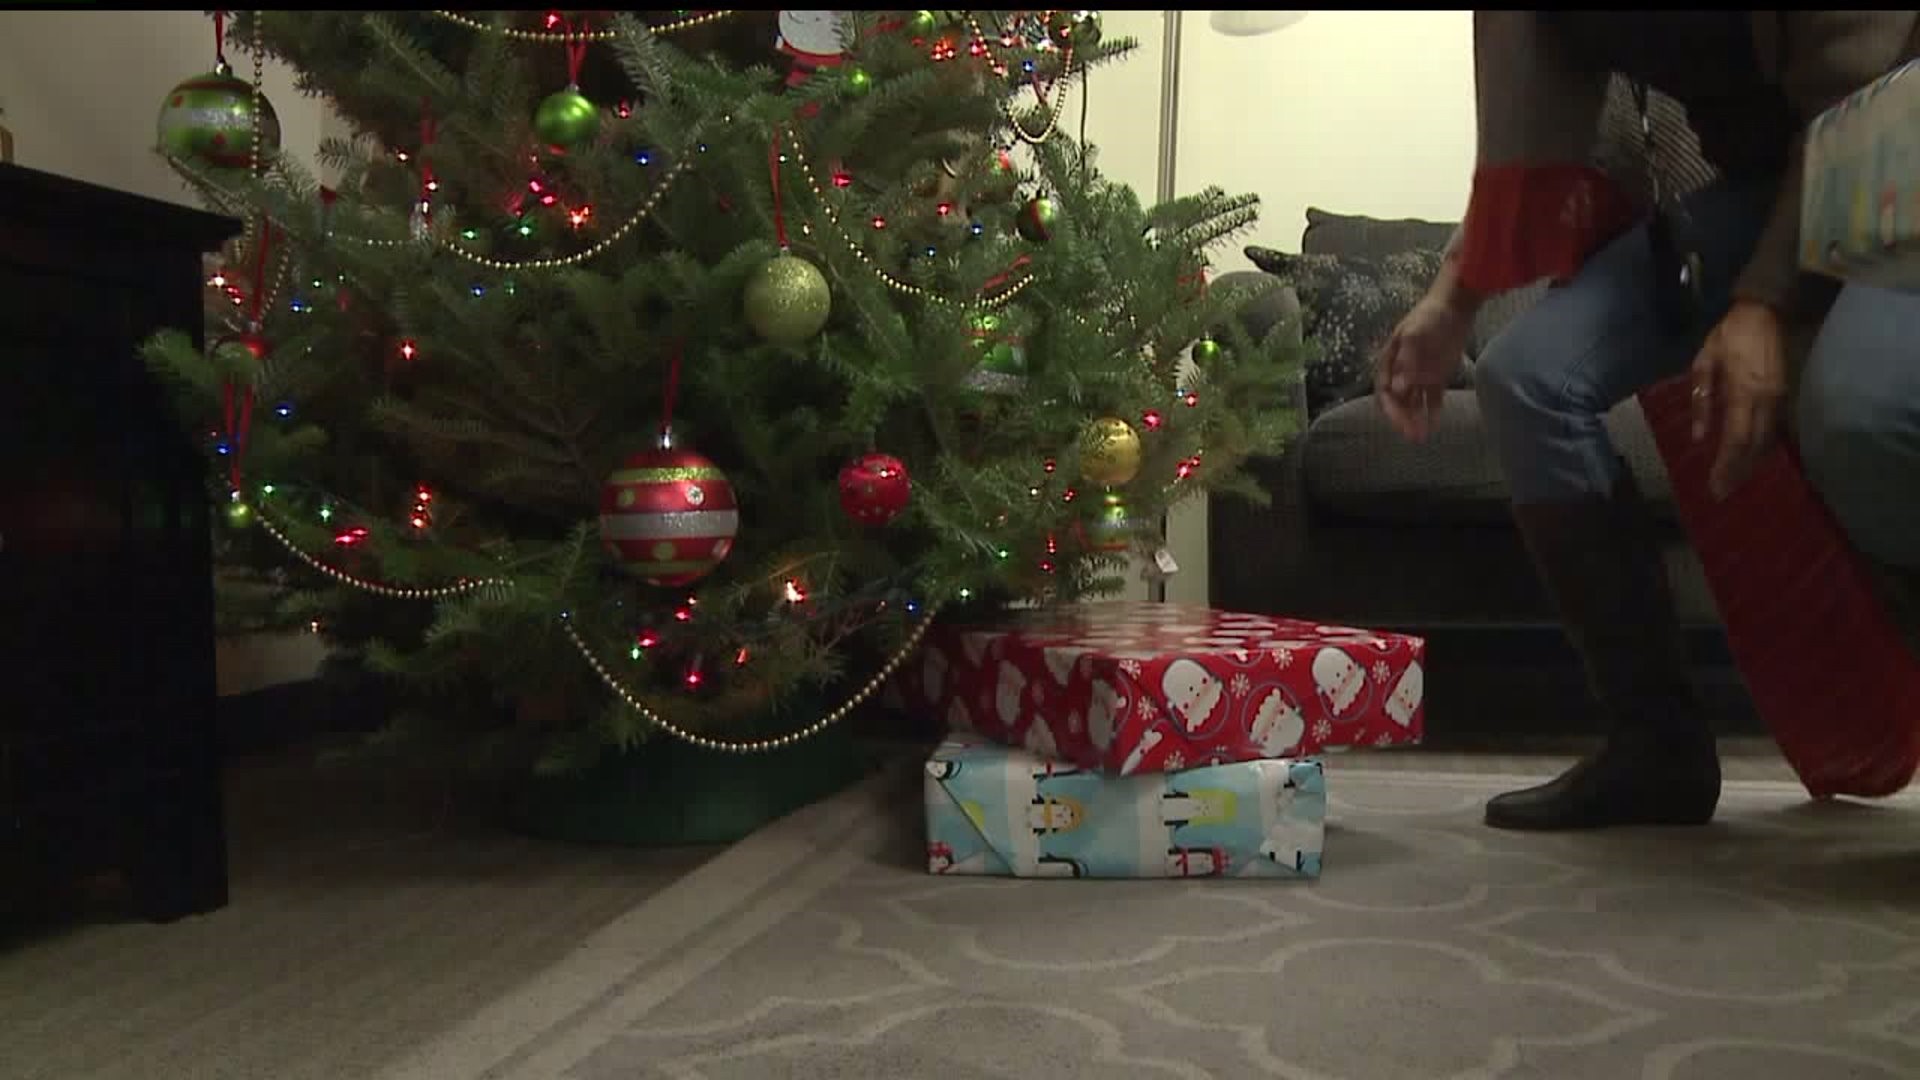 A homeless shelter in Harrisburg is brightening holiday spirits for its residents